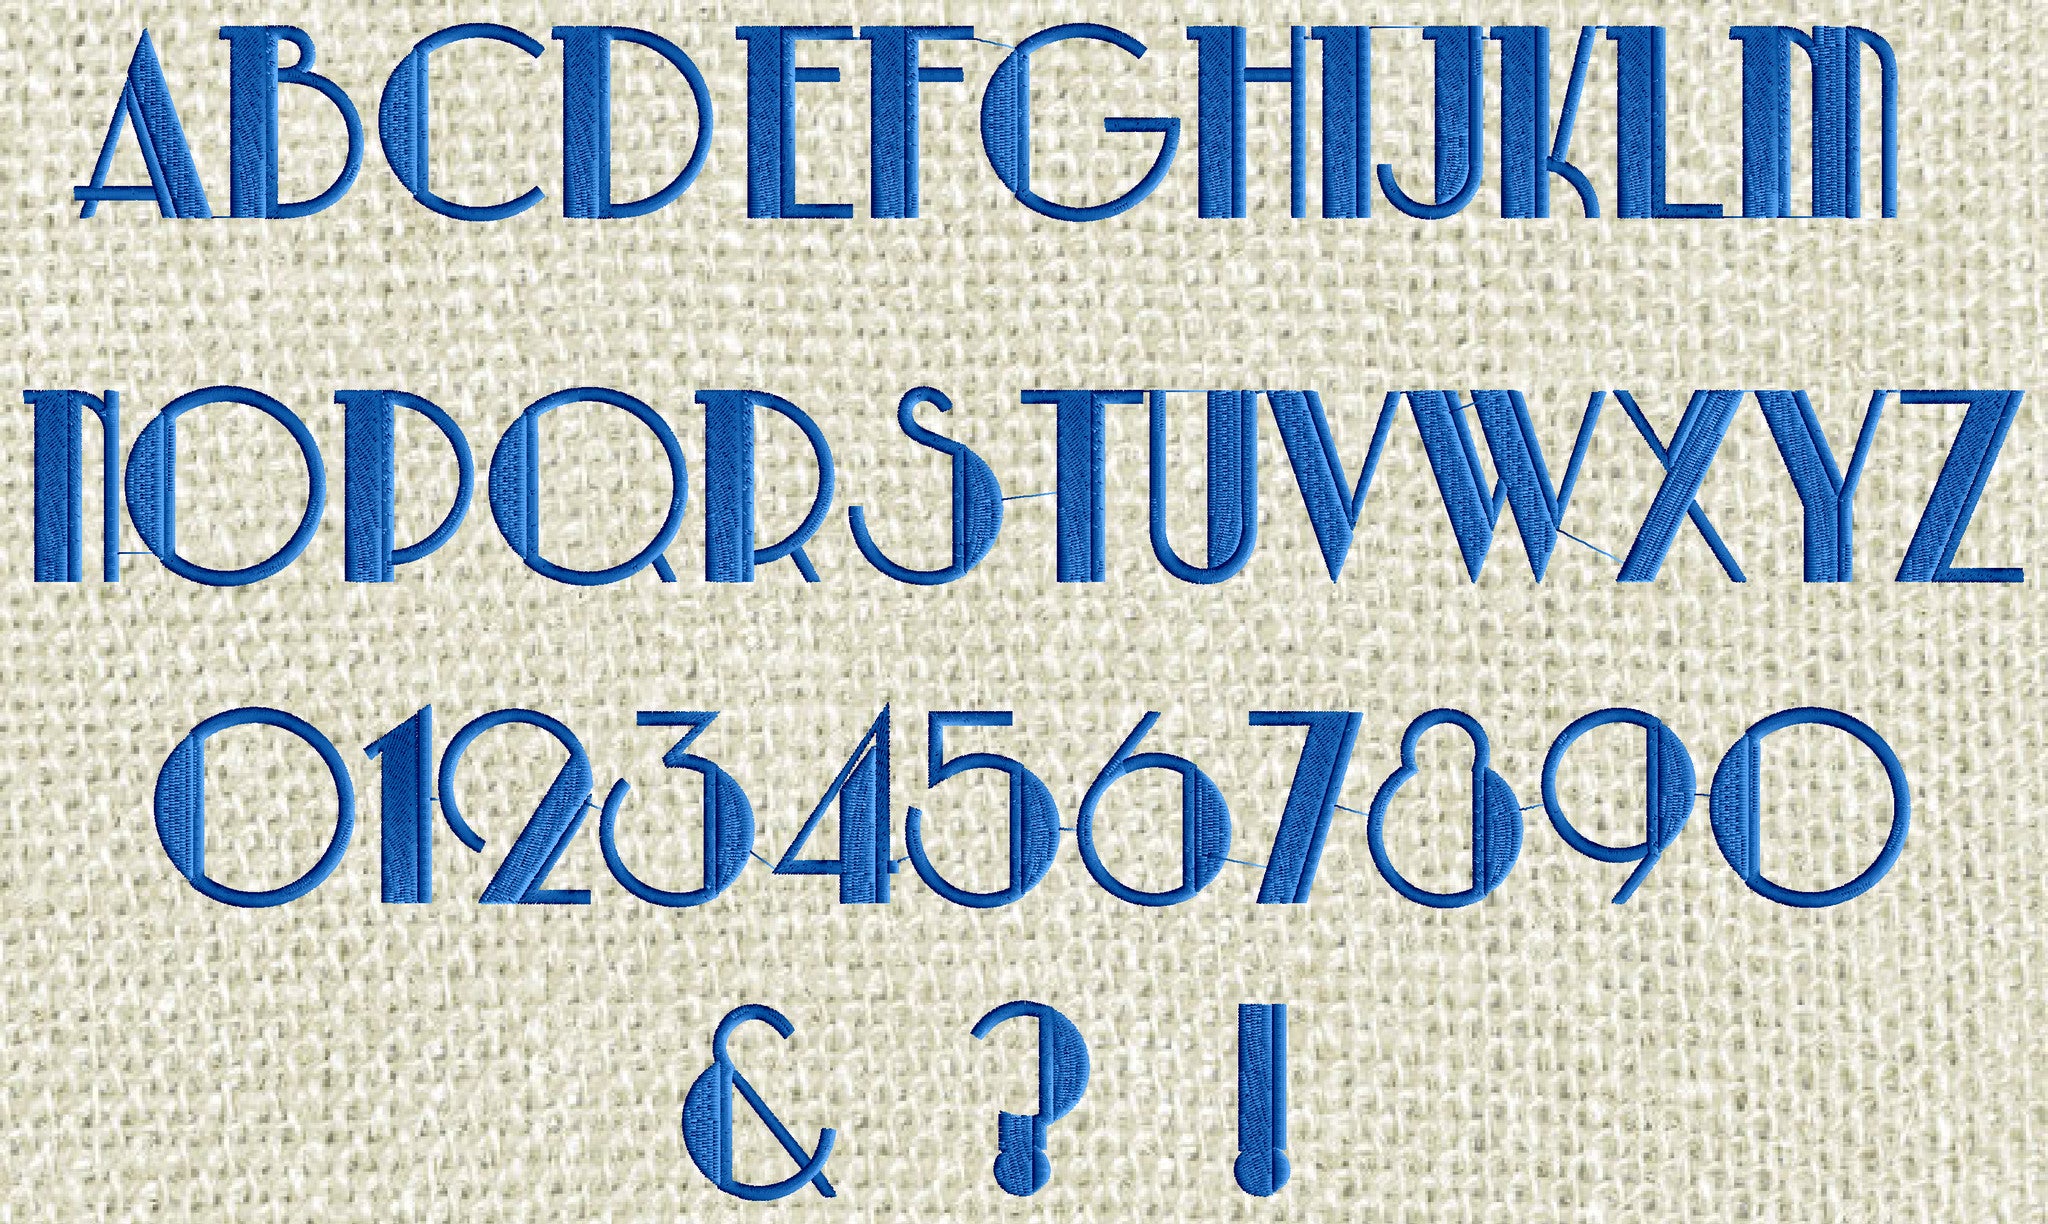 GLITZBY Monogram Font Embroidery design File - Retro Letters Numbers & Symbols -1.5" tall - Instant download Dst Hus Jef Pes Exp Vp3 format